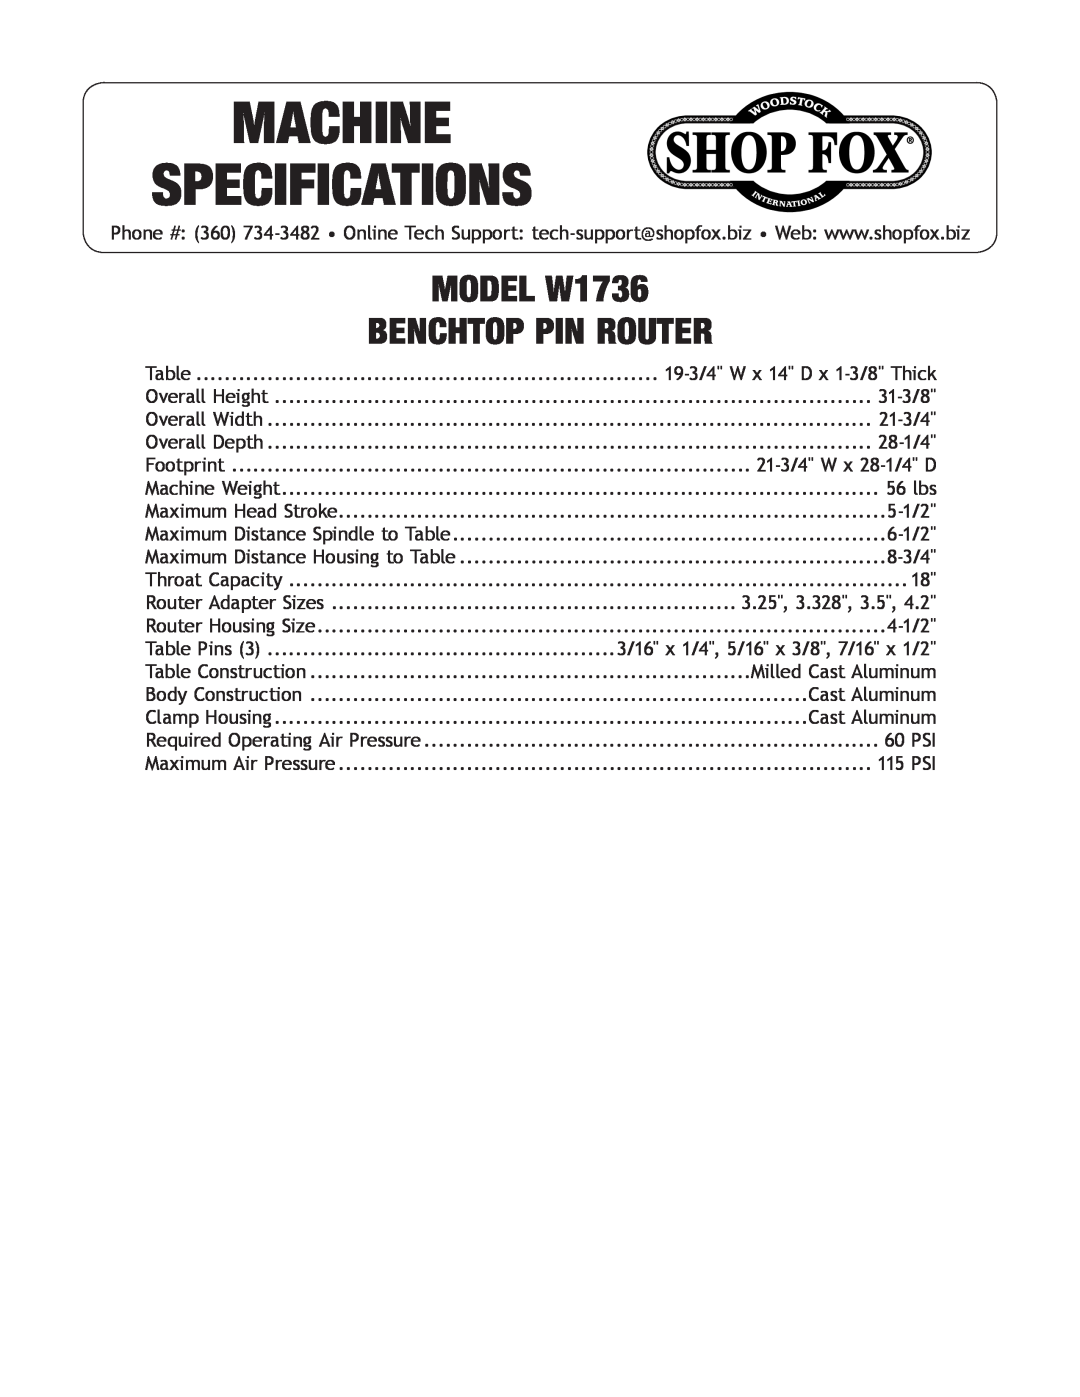 Woodstock specifications Machine Specifications, benchtop pin router, model W1736 